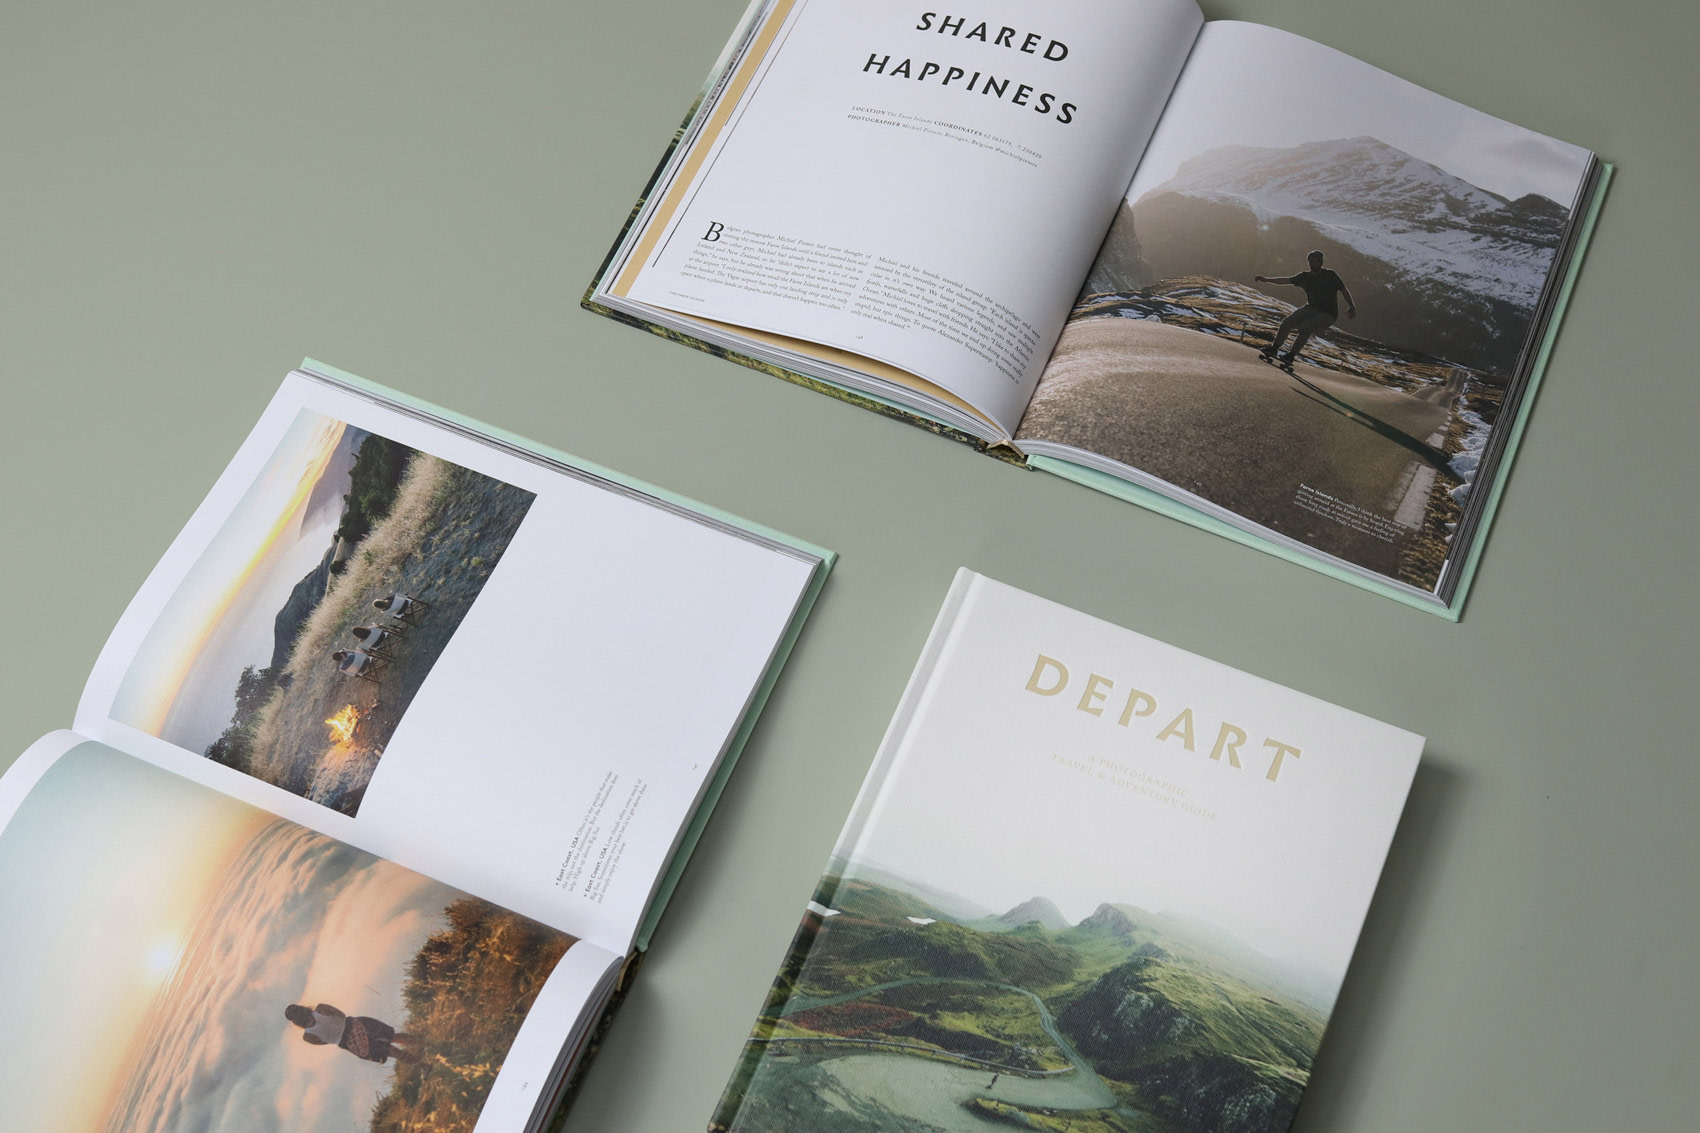 Travel & photography book